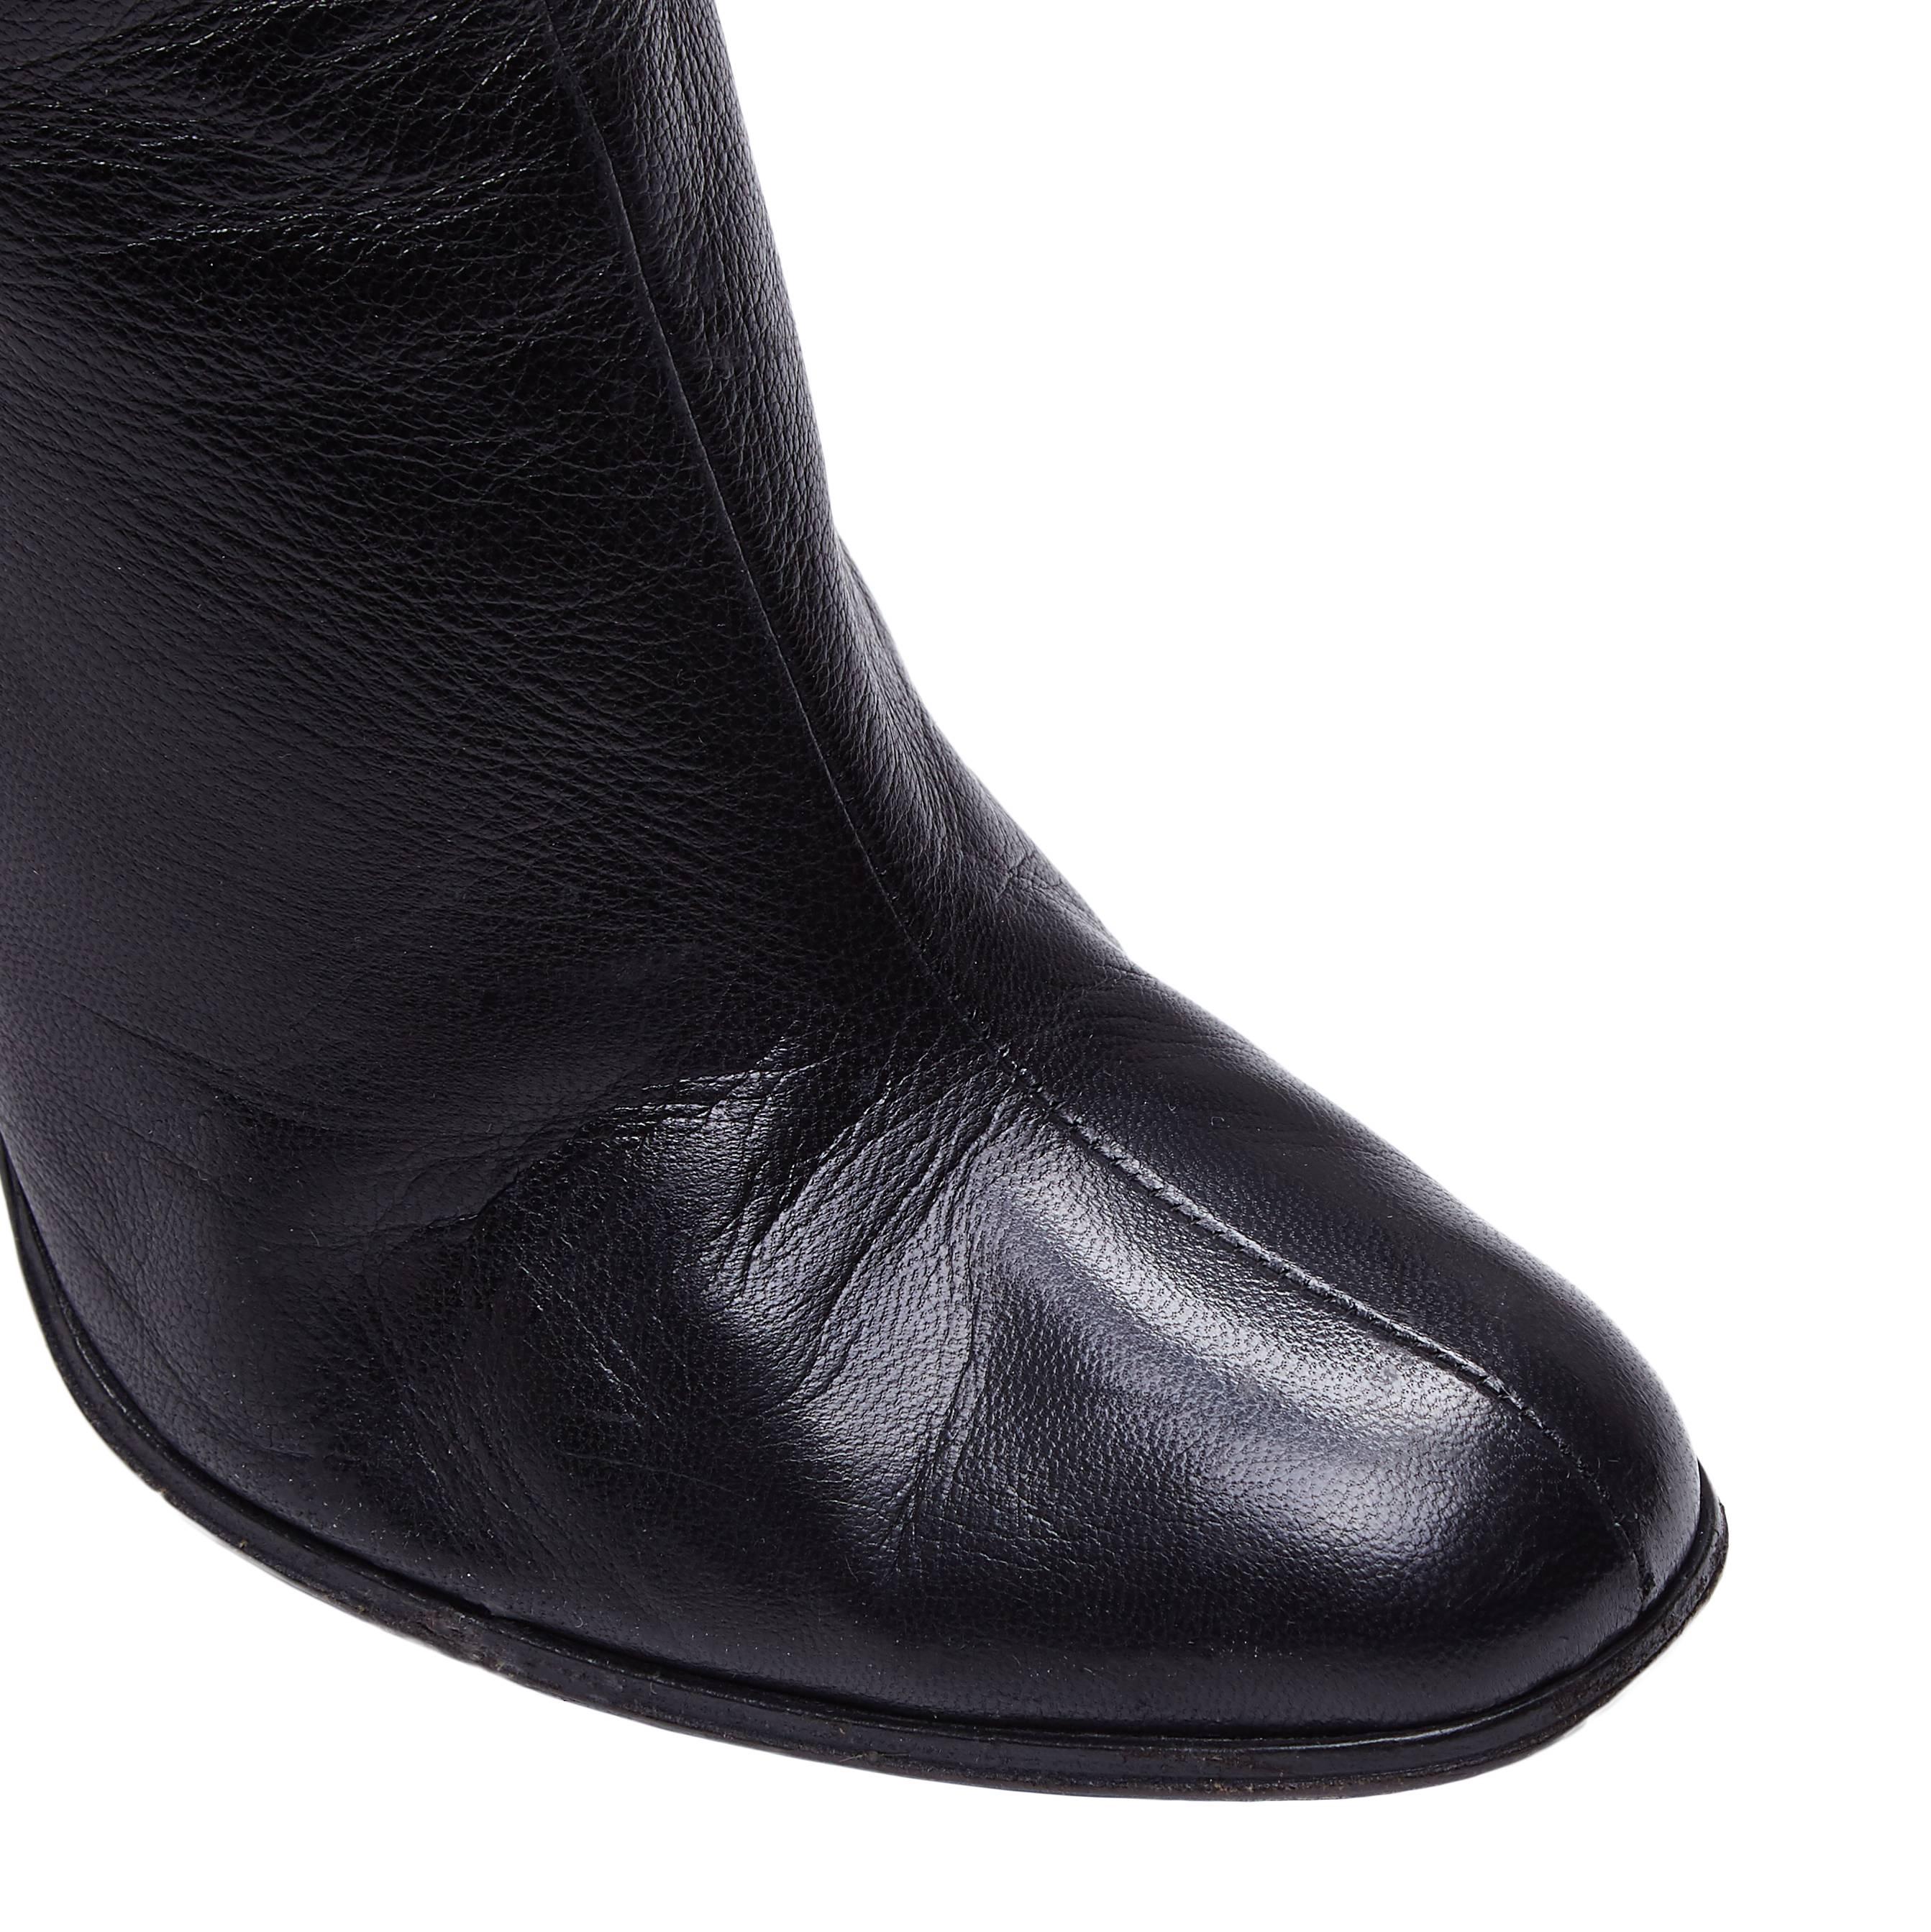 Women's or Men's Gucci by Tom Ford Black Leather Boots